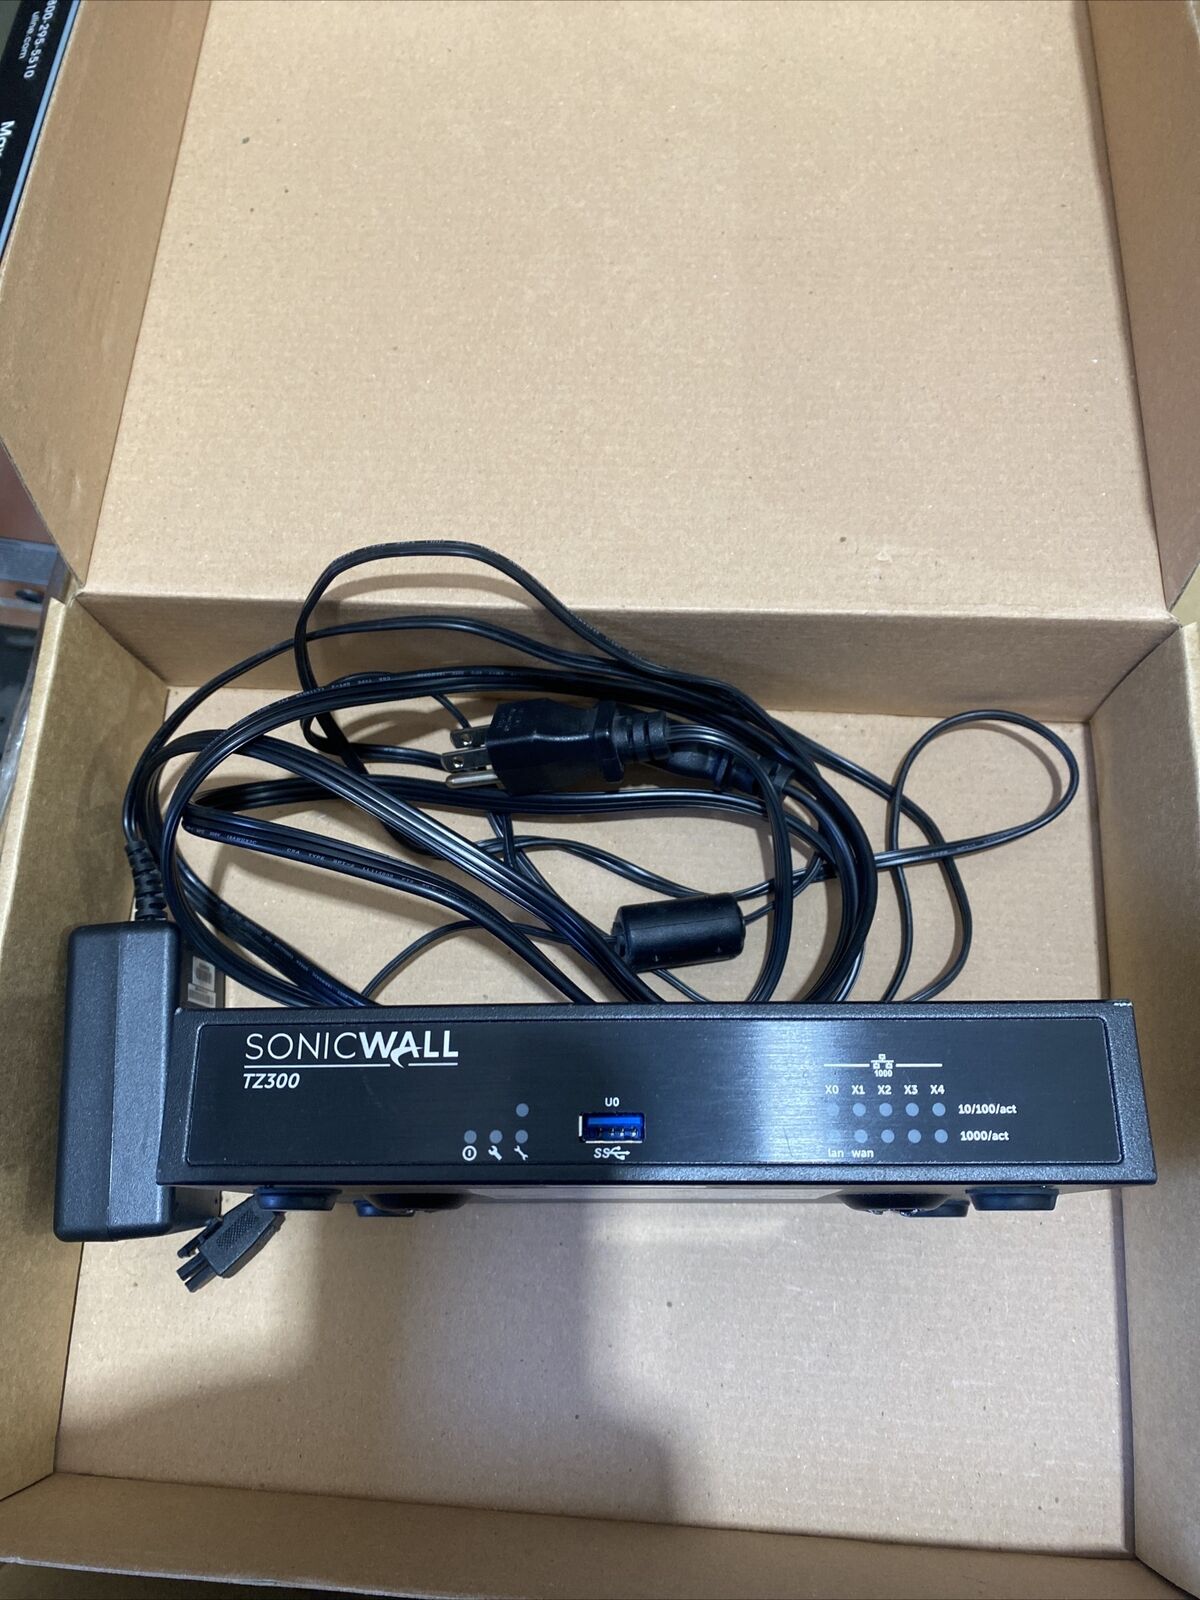 Dell SonicWall TZ300 5 Port Network Security Firewall Appliance APL28-0B4